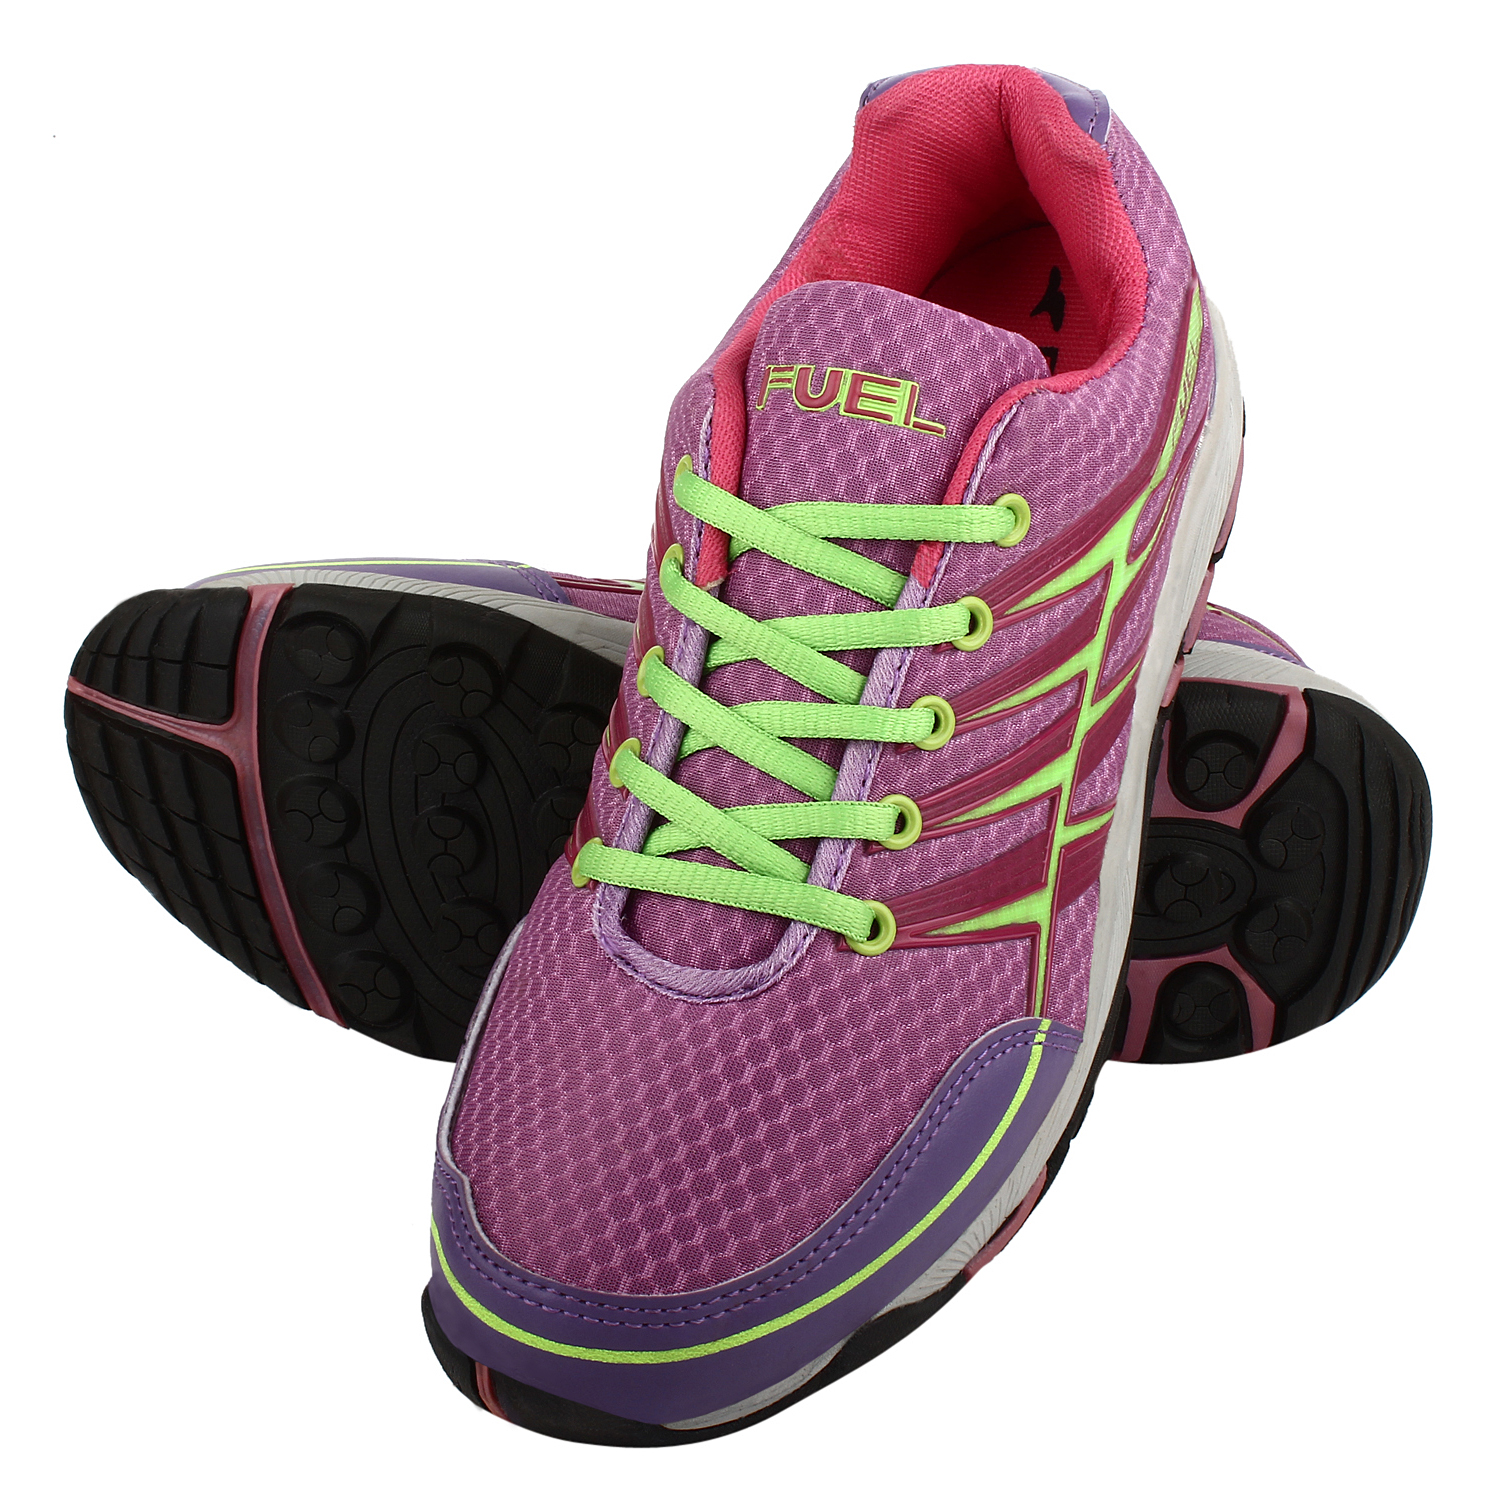 Buy Fuel Womens Girls Laced Up Solid Walking Shoes, Cycling Shoes ...